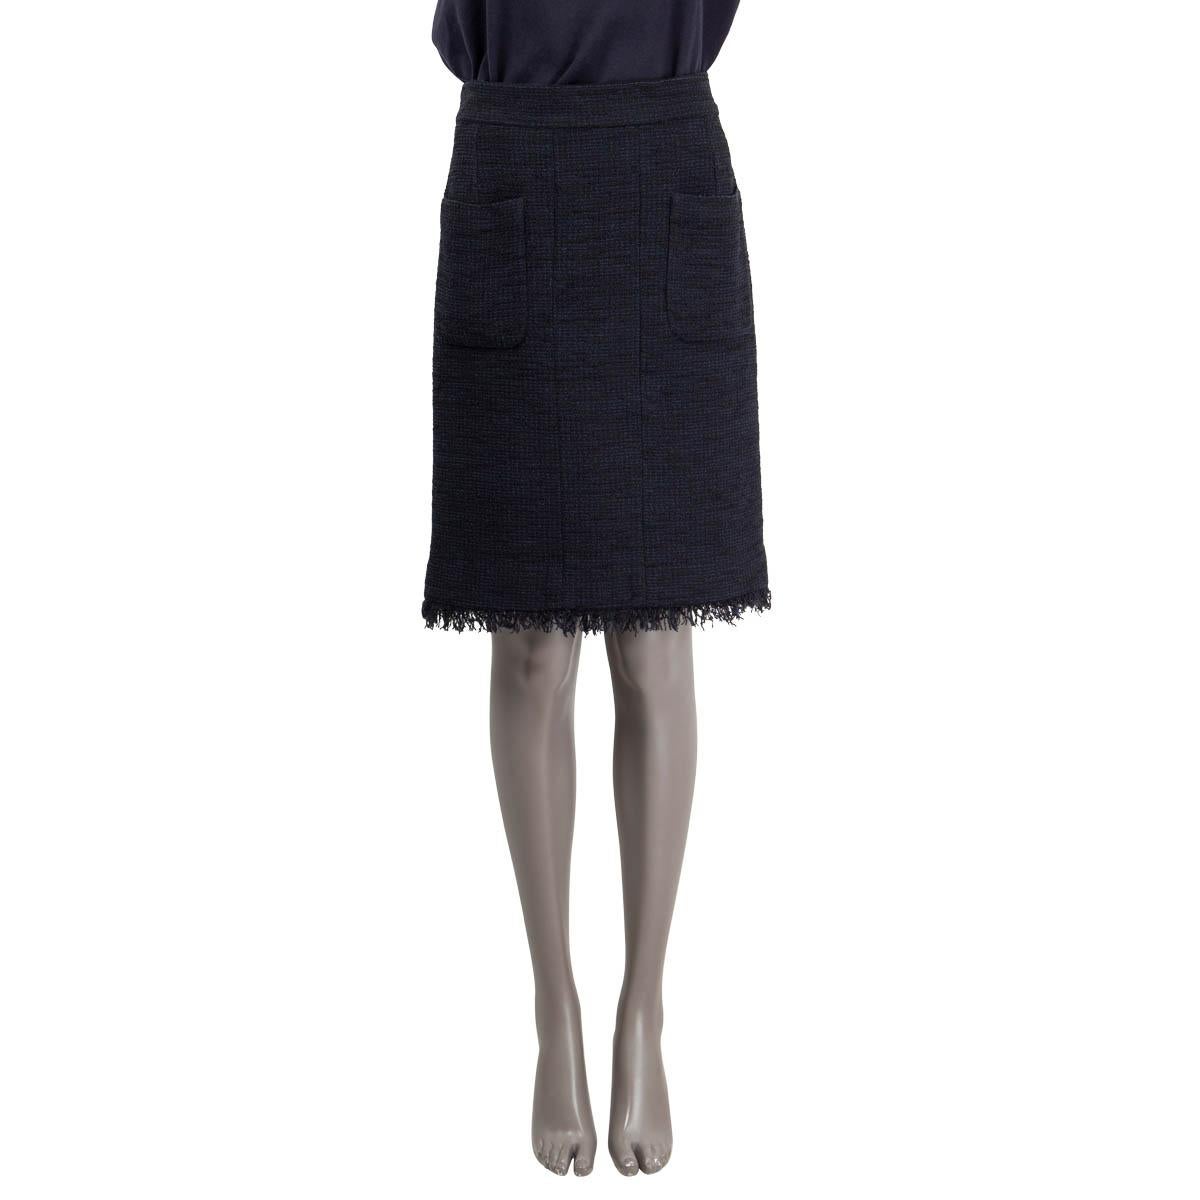 100% authentic Chanel tweed knee-length skirt in navy blue and black cotton (55%) and polyamide (45%) with two patch-pockets at front and a buttoned slit at the back. Fringed hem and black silk (100%) lining. Has been worn and is in excellent